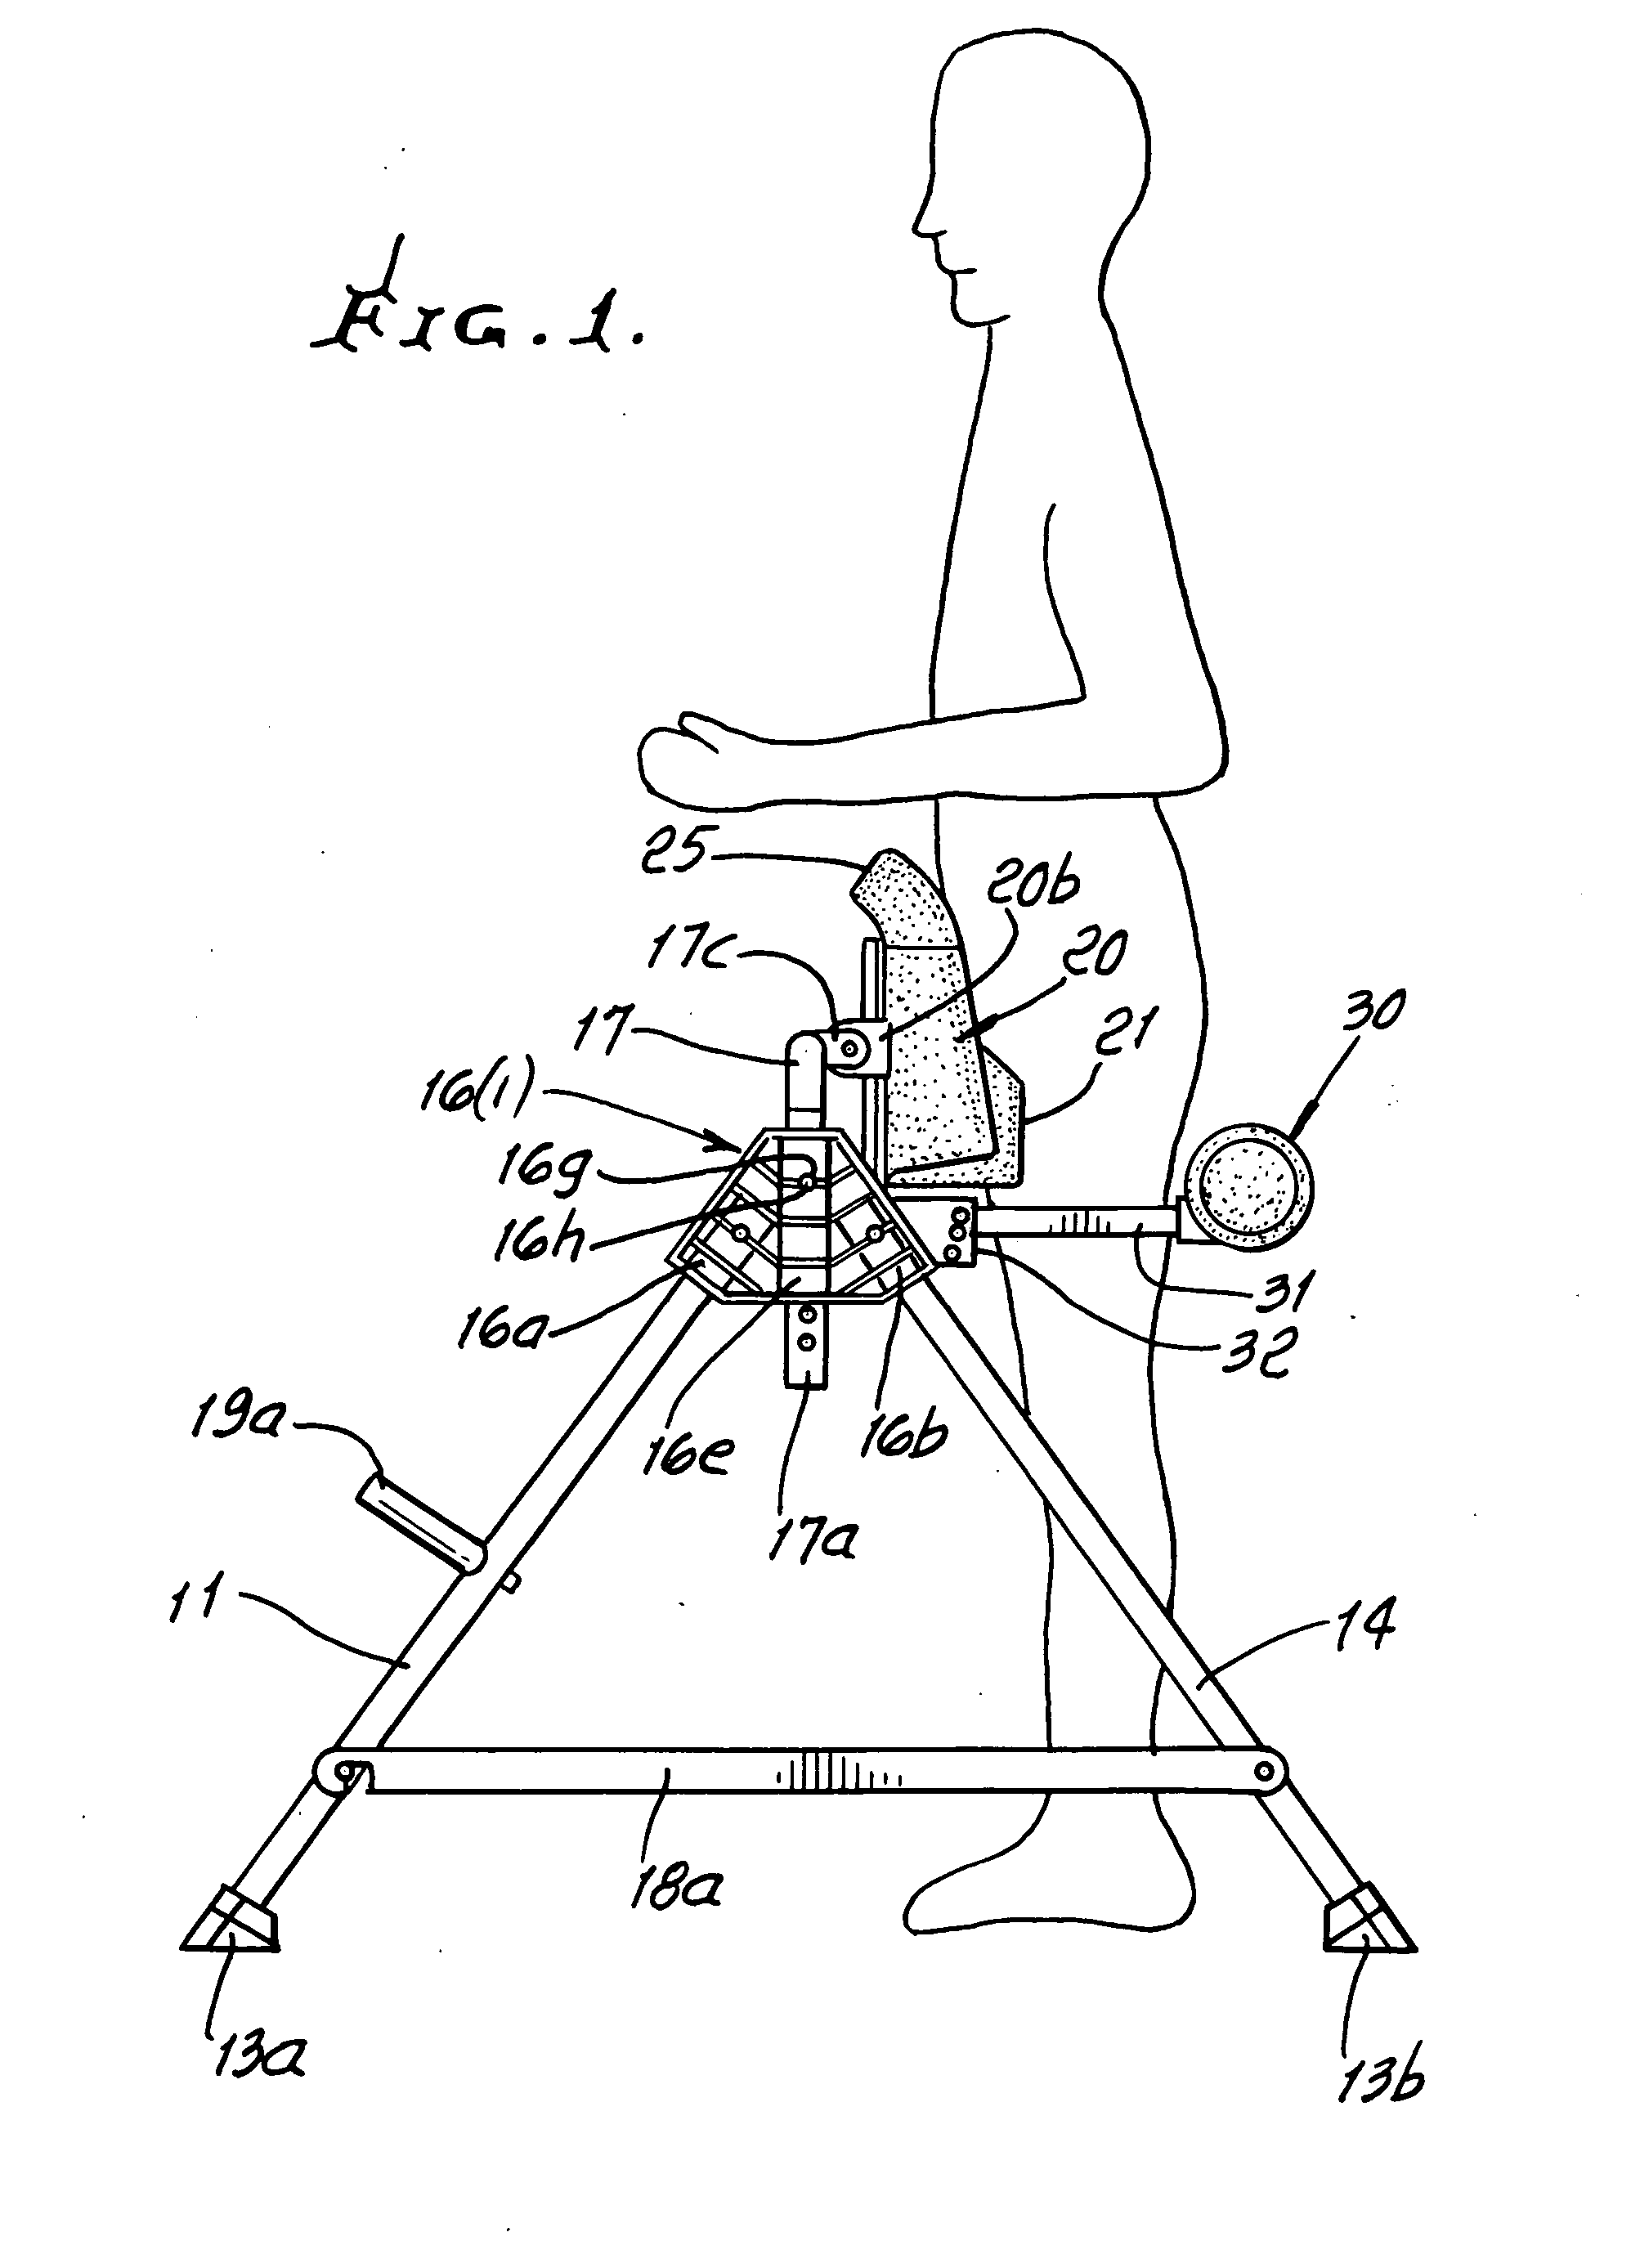 Abductor contraction, variable leg/knee/thigh/trunk and spinal decompression exercice and rehabilitation apparatus and method